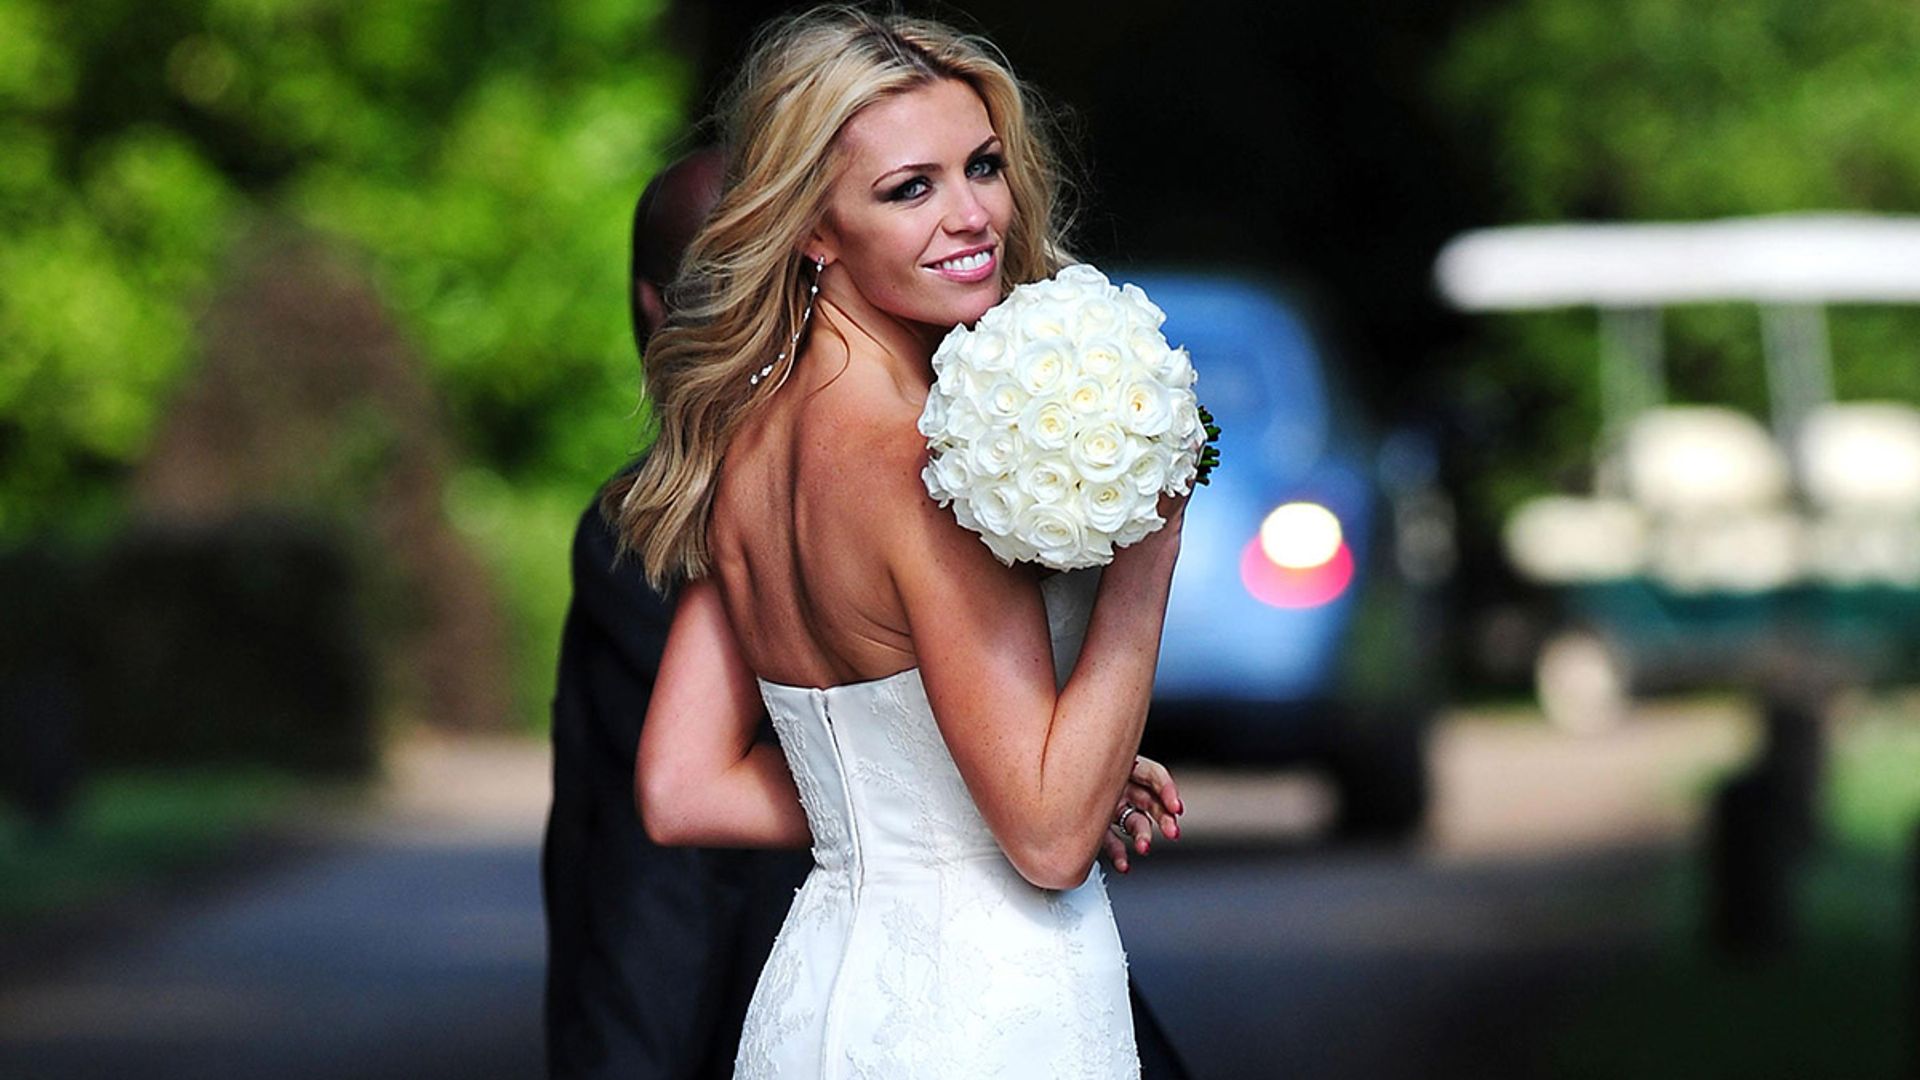 Abbey Clancy dons her wedding dress as she celebrates 9th wedding anniversary with Peter Crouch